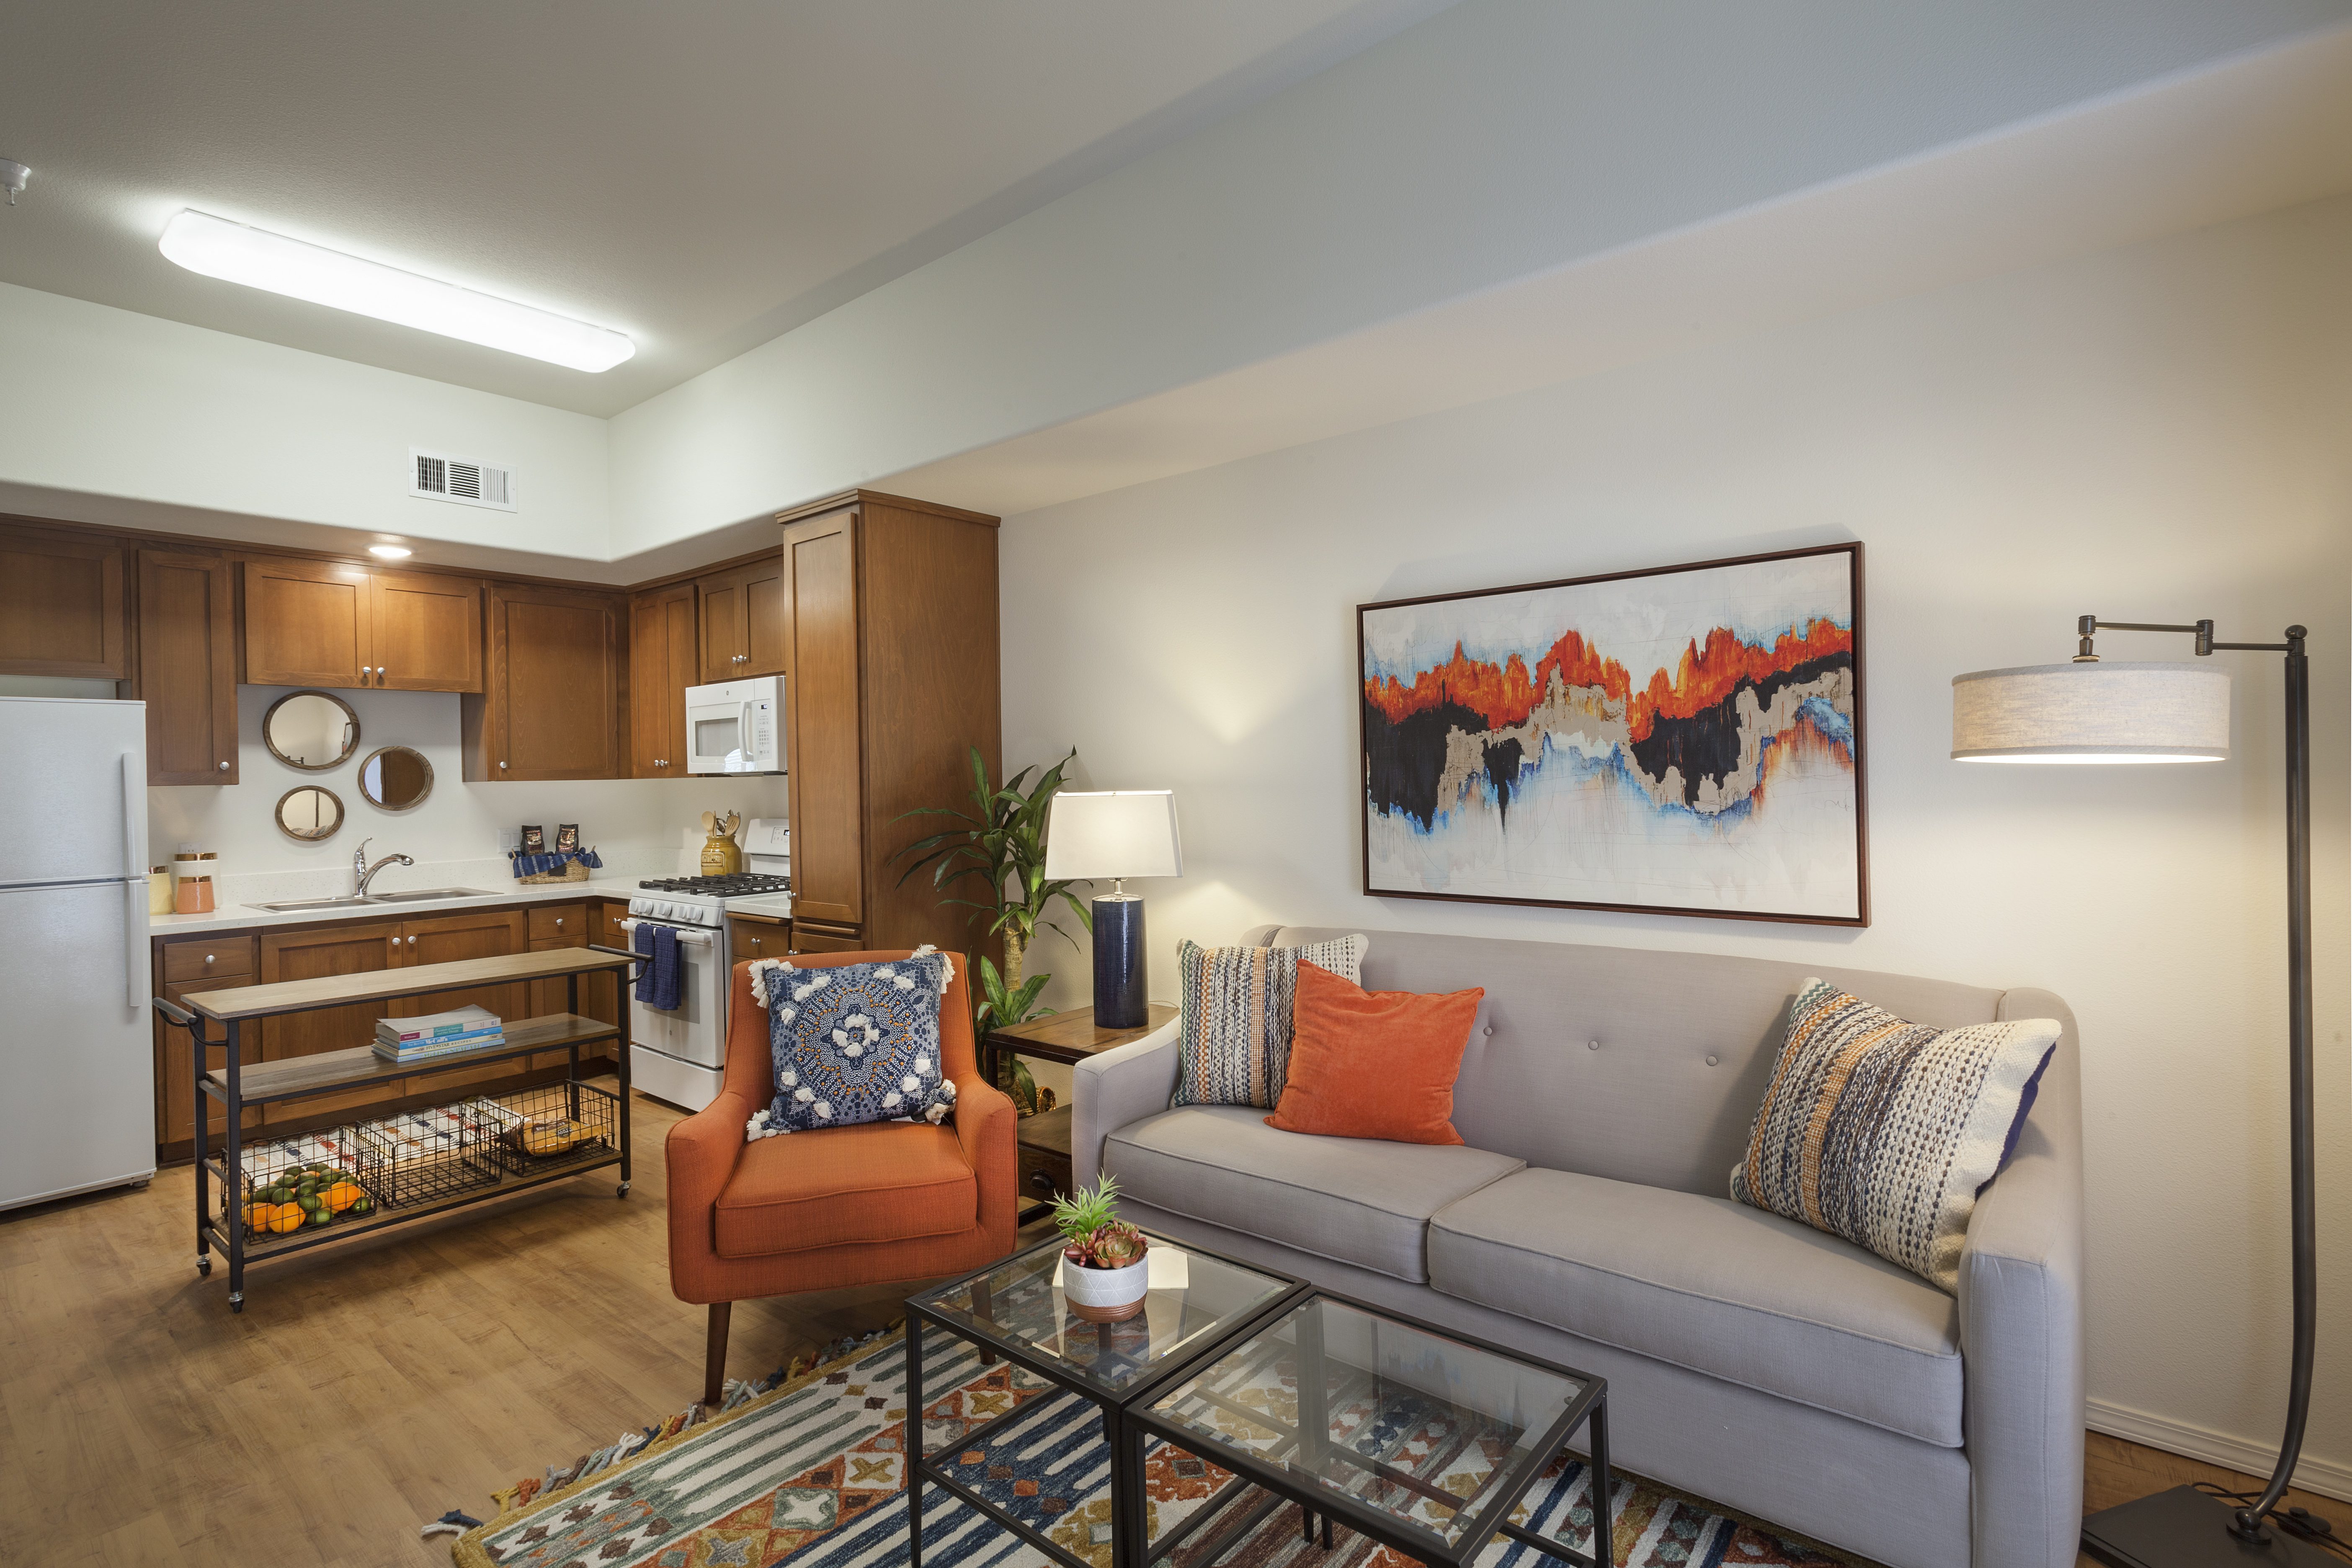 New apartments designed for people 55 and older